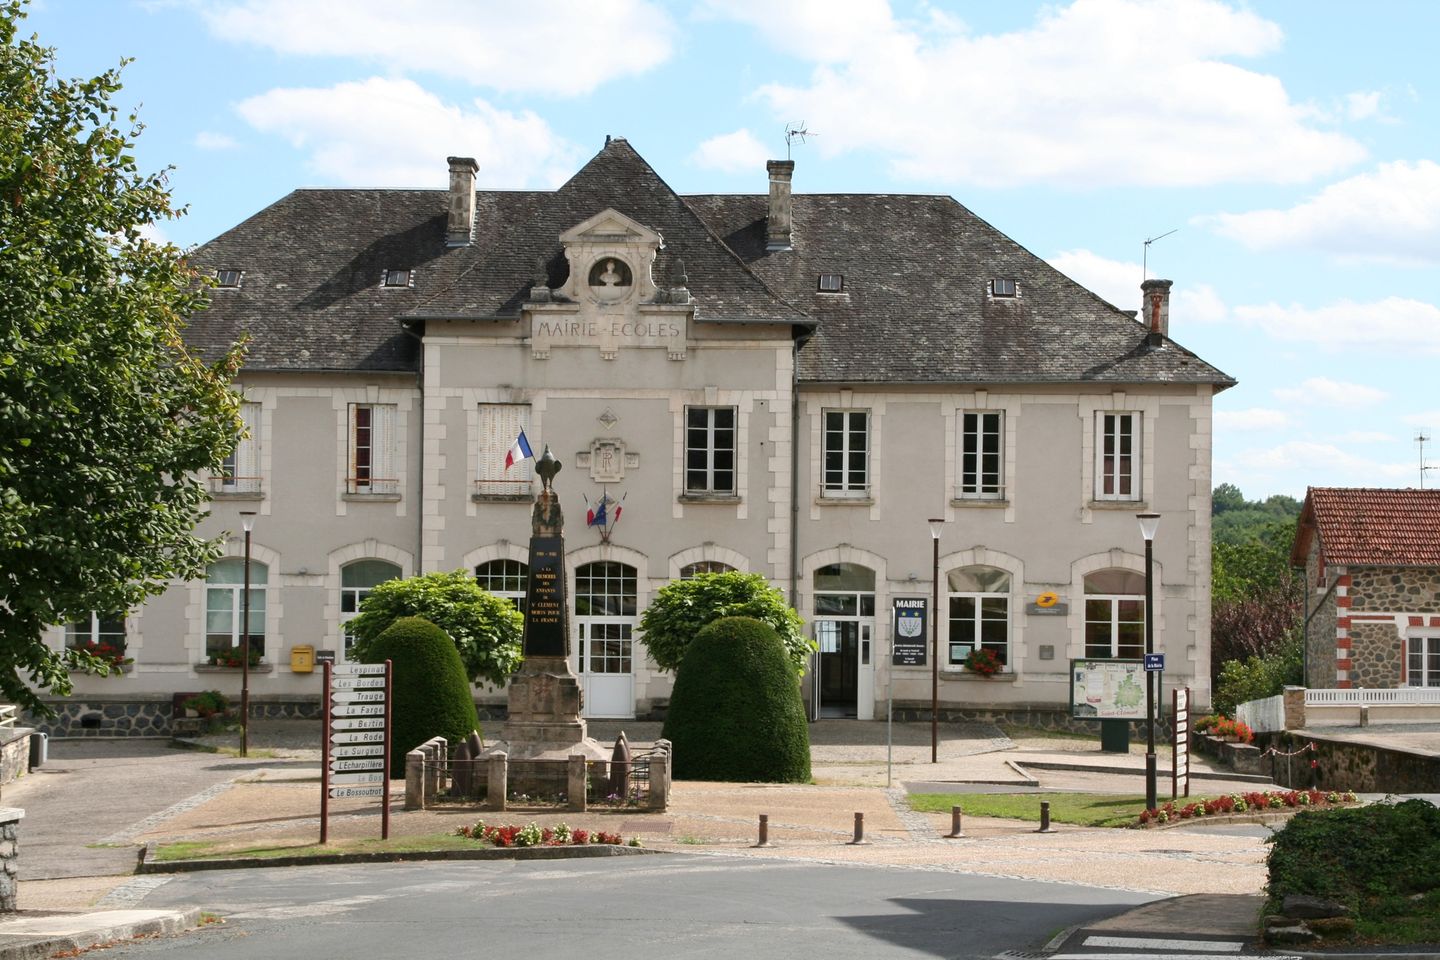 You are currently viewing Fermeture de la mairie